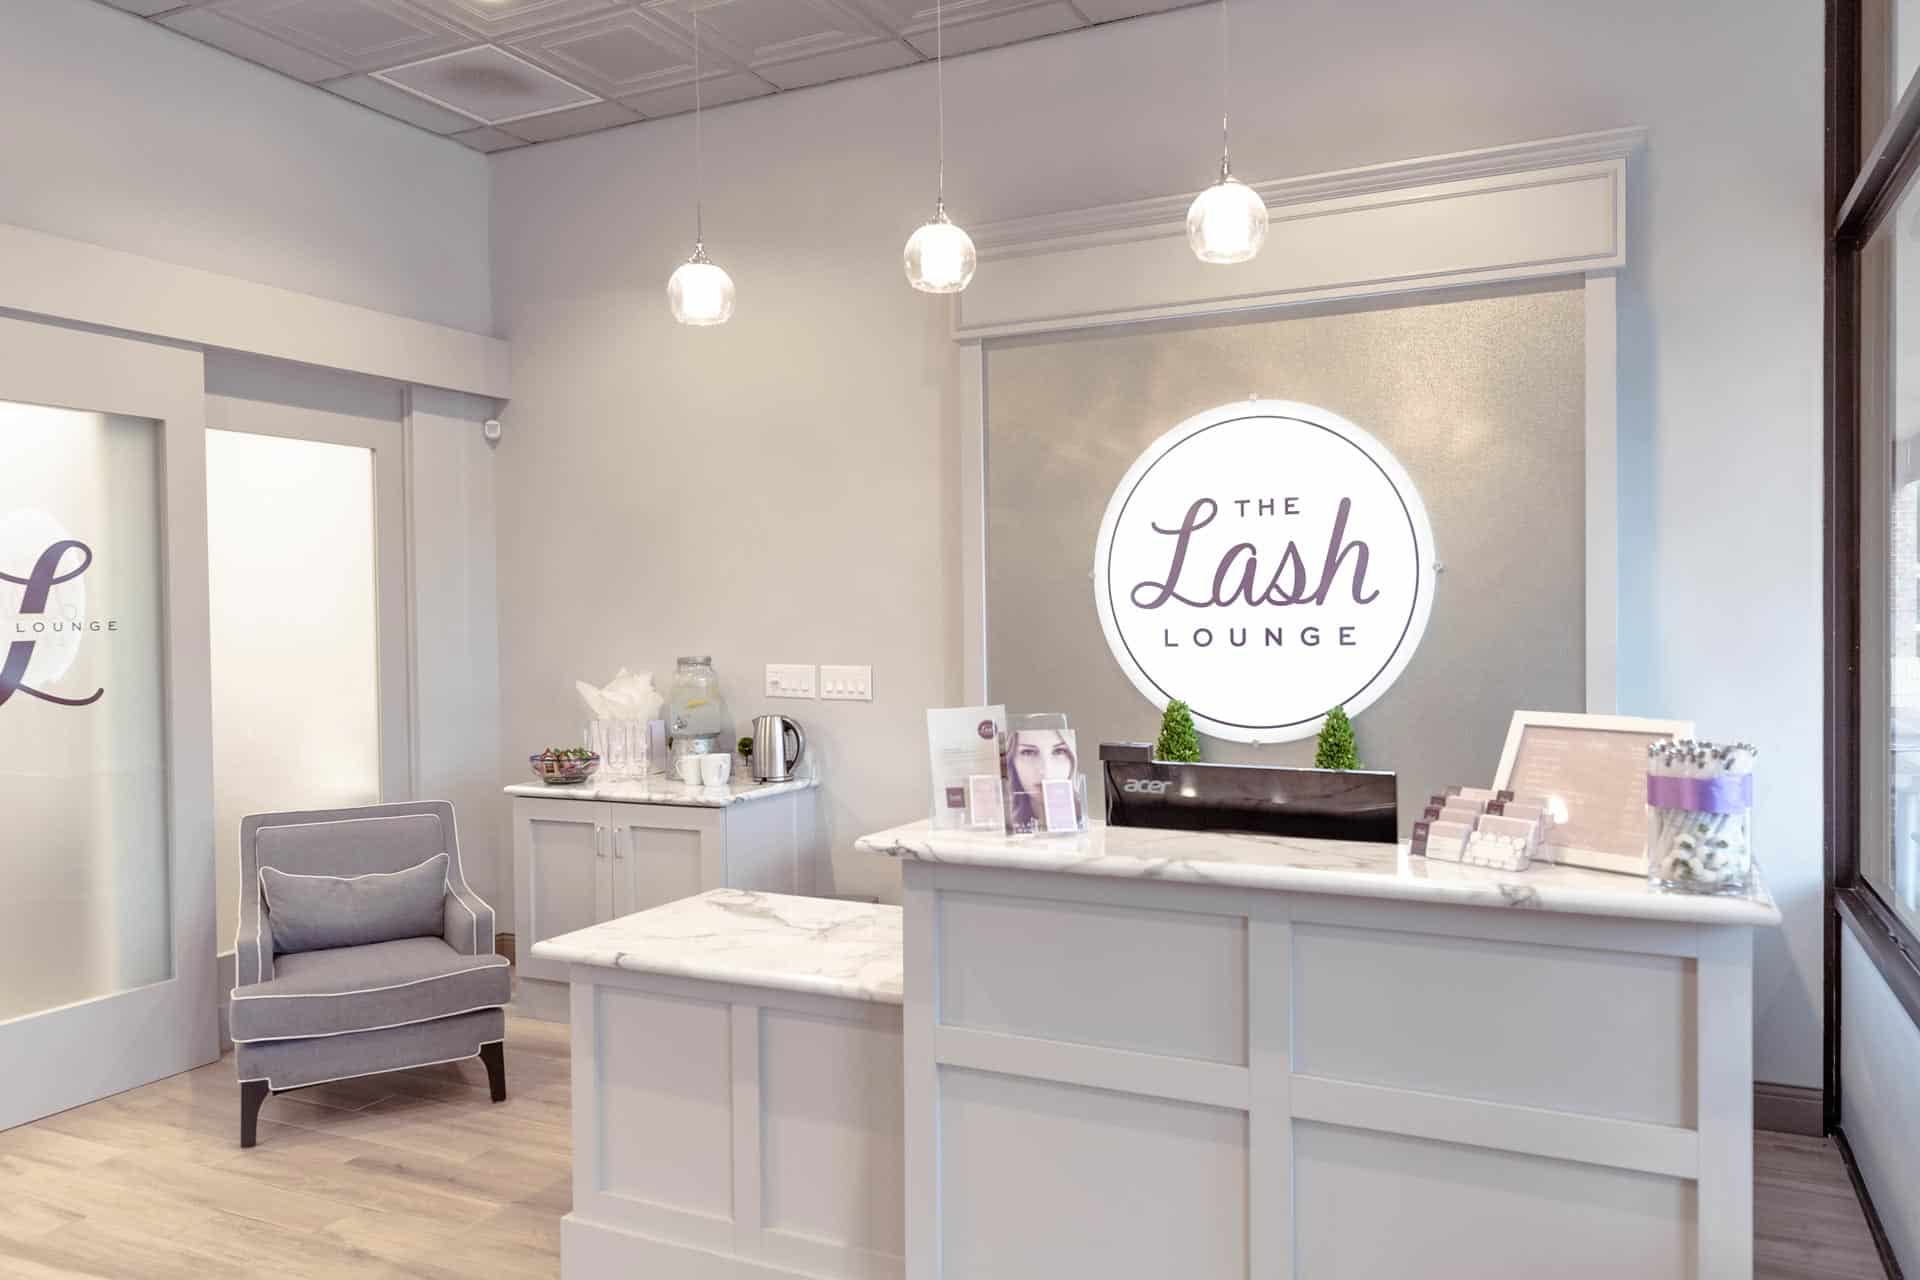 The Lash Lounge careers are here